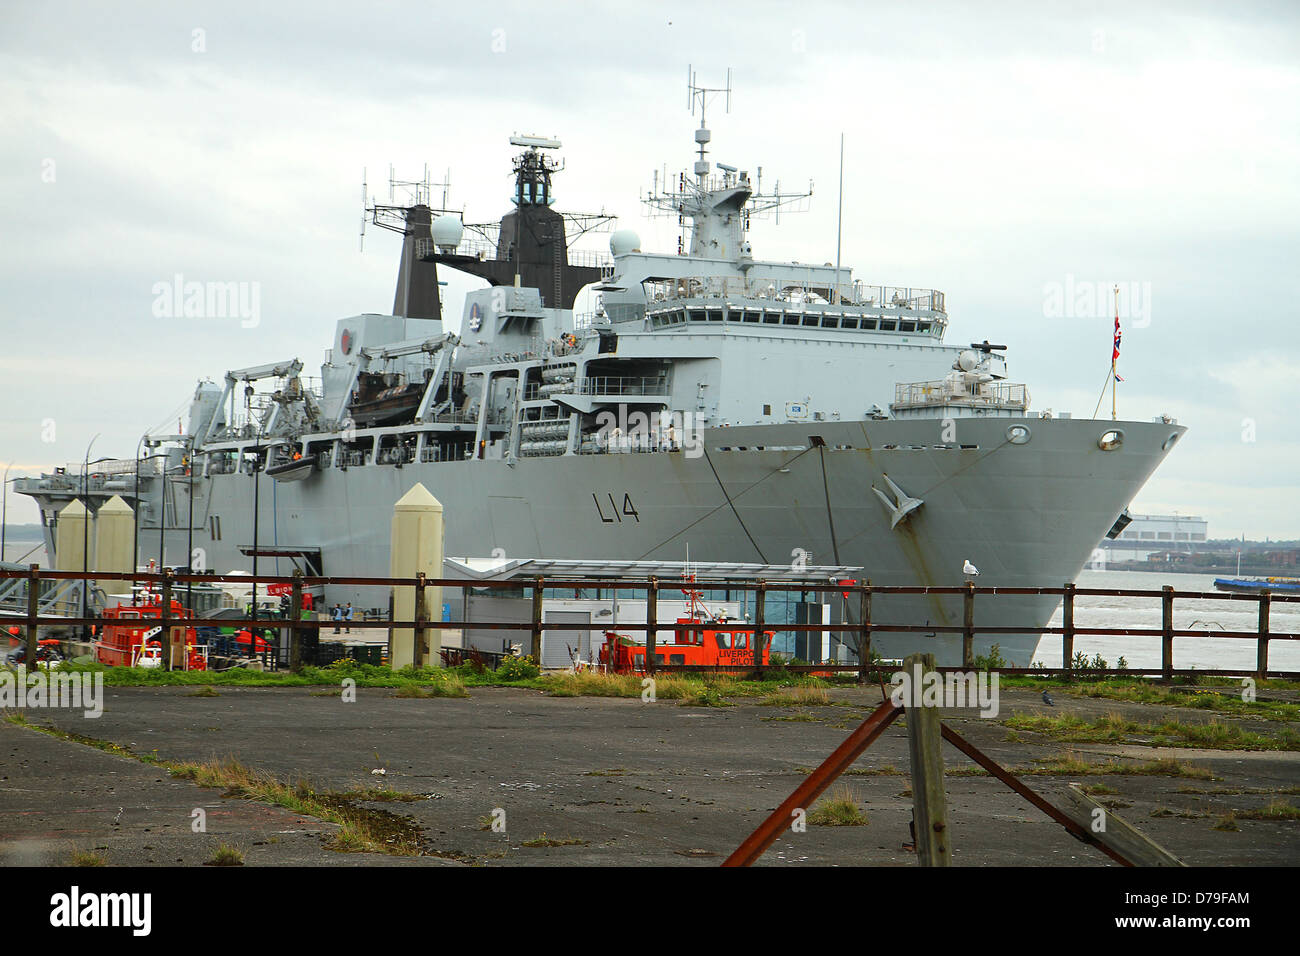 One of the Royal Navy's largest warships is in Liverpool for a six-day visit to the city. HMS Albion, an 18,000 tonne Stock Photo